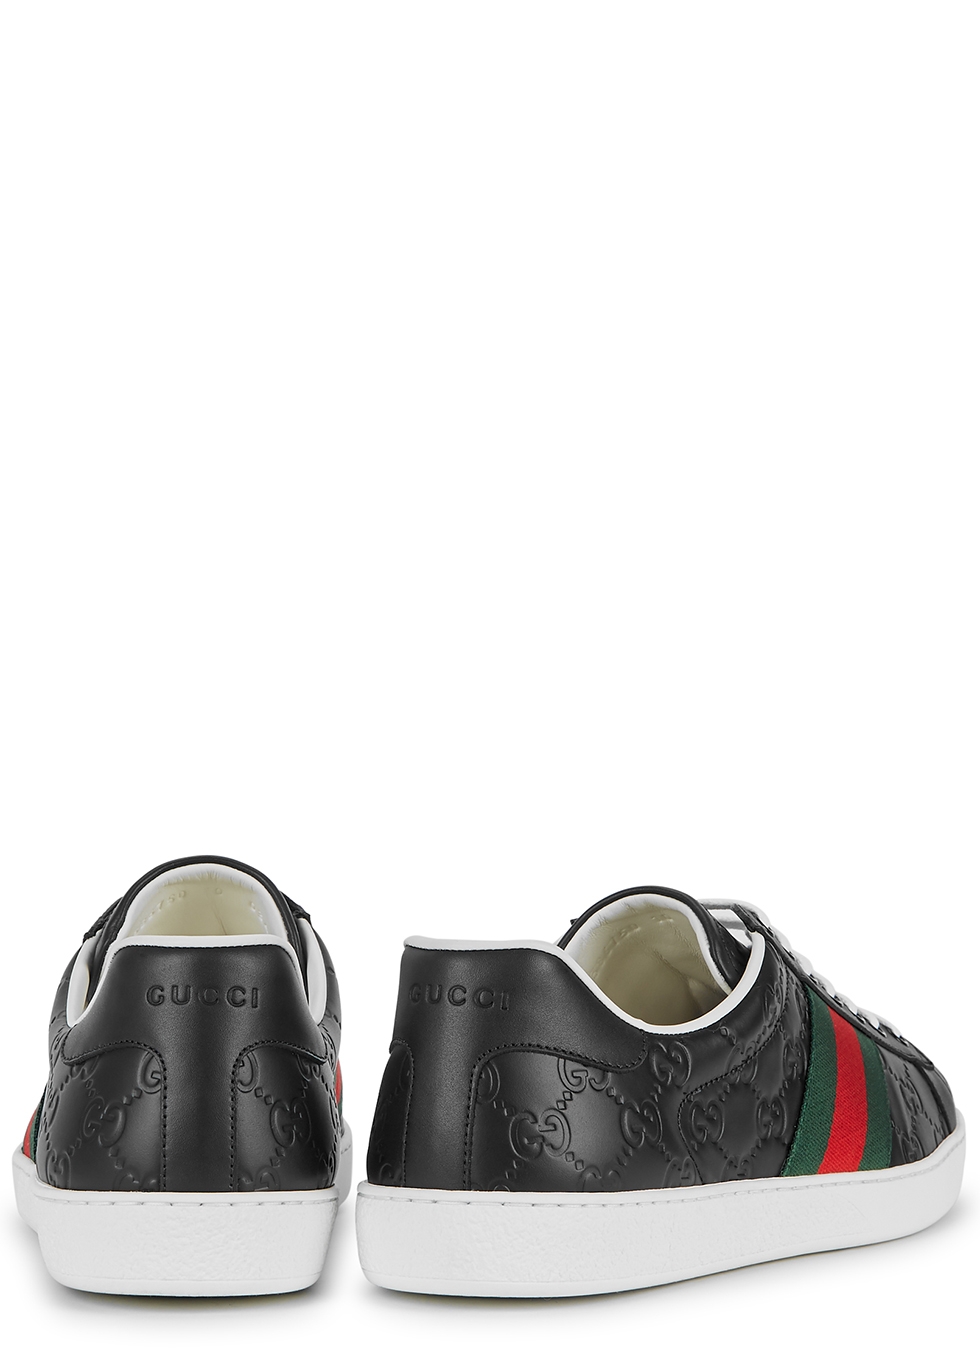 gucci ace gg shoes